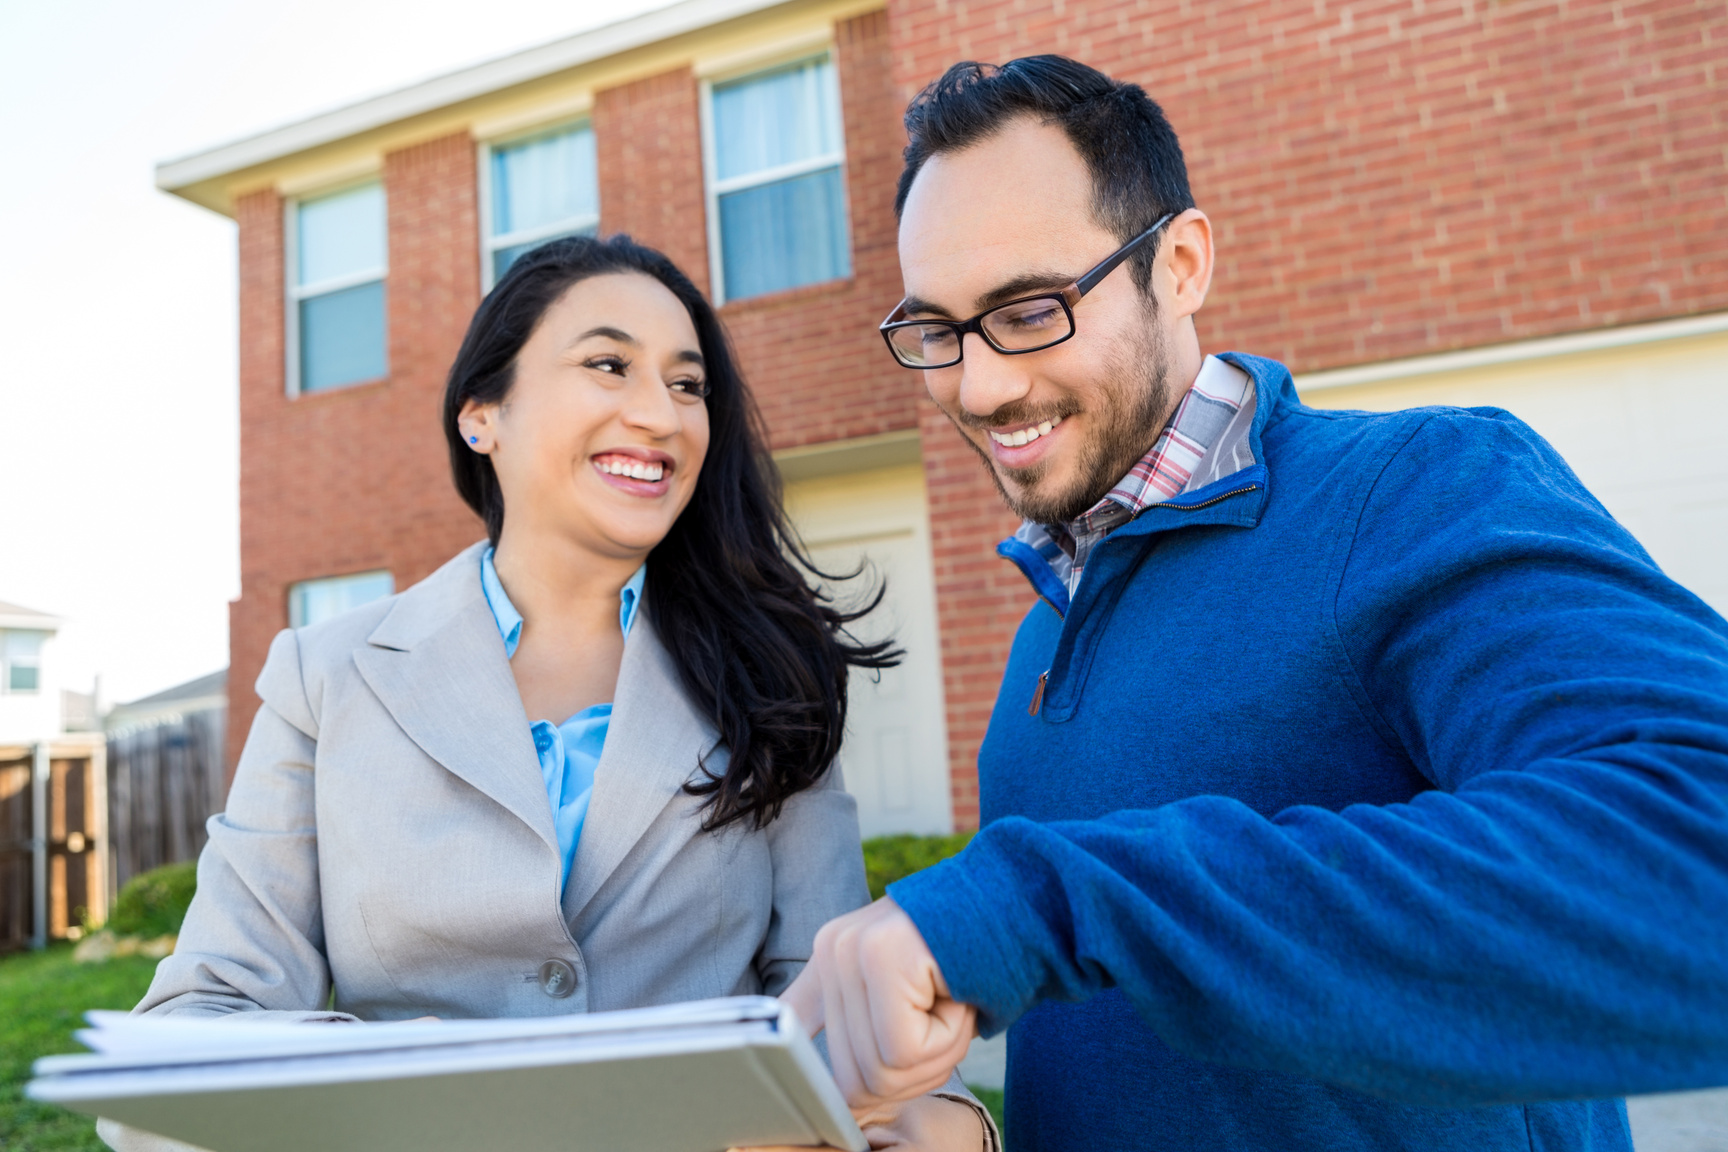 Potential client discusses home with realtor